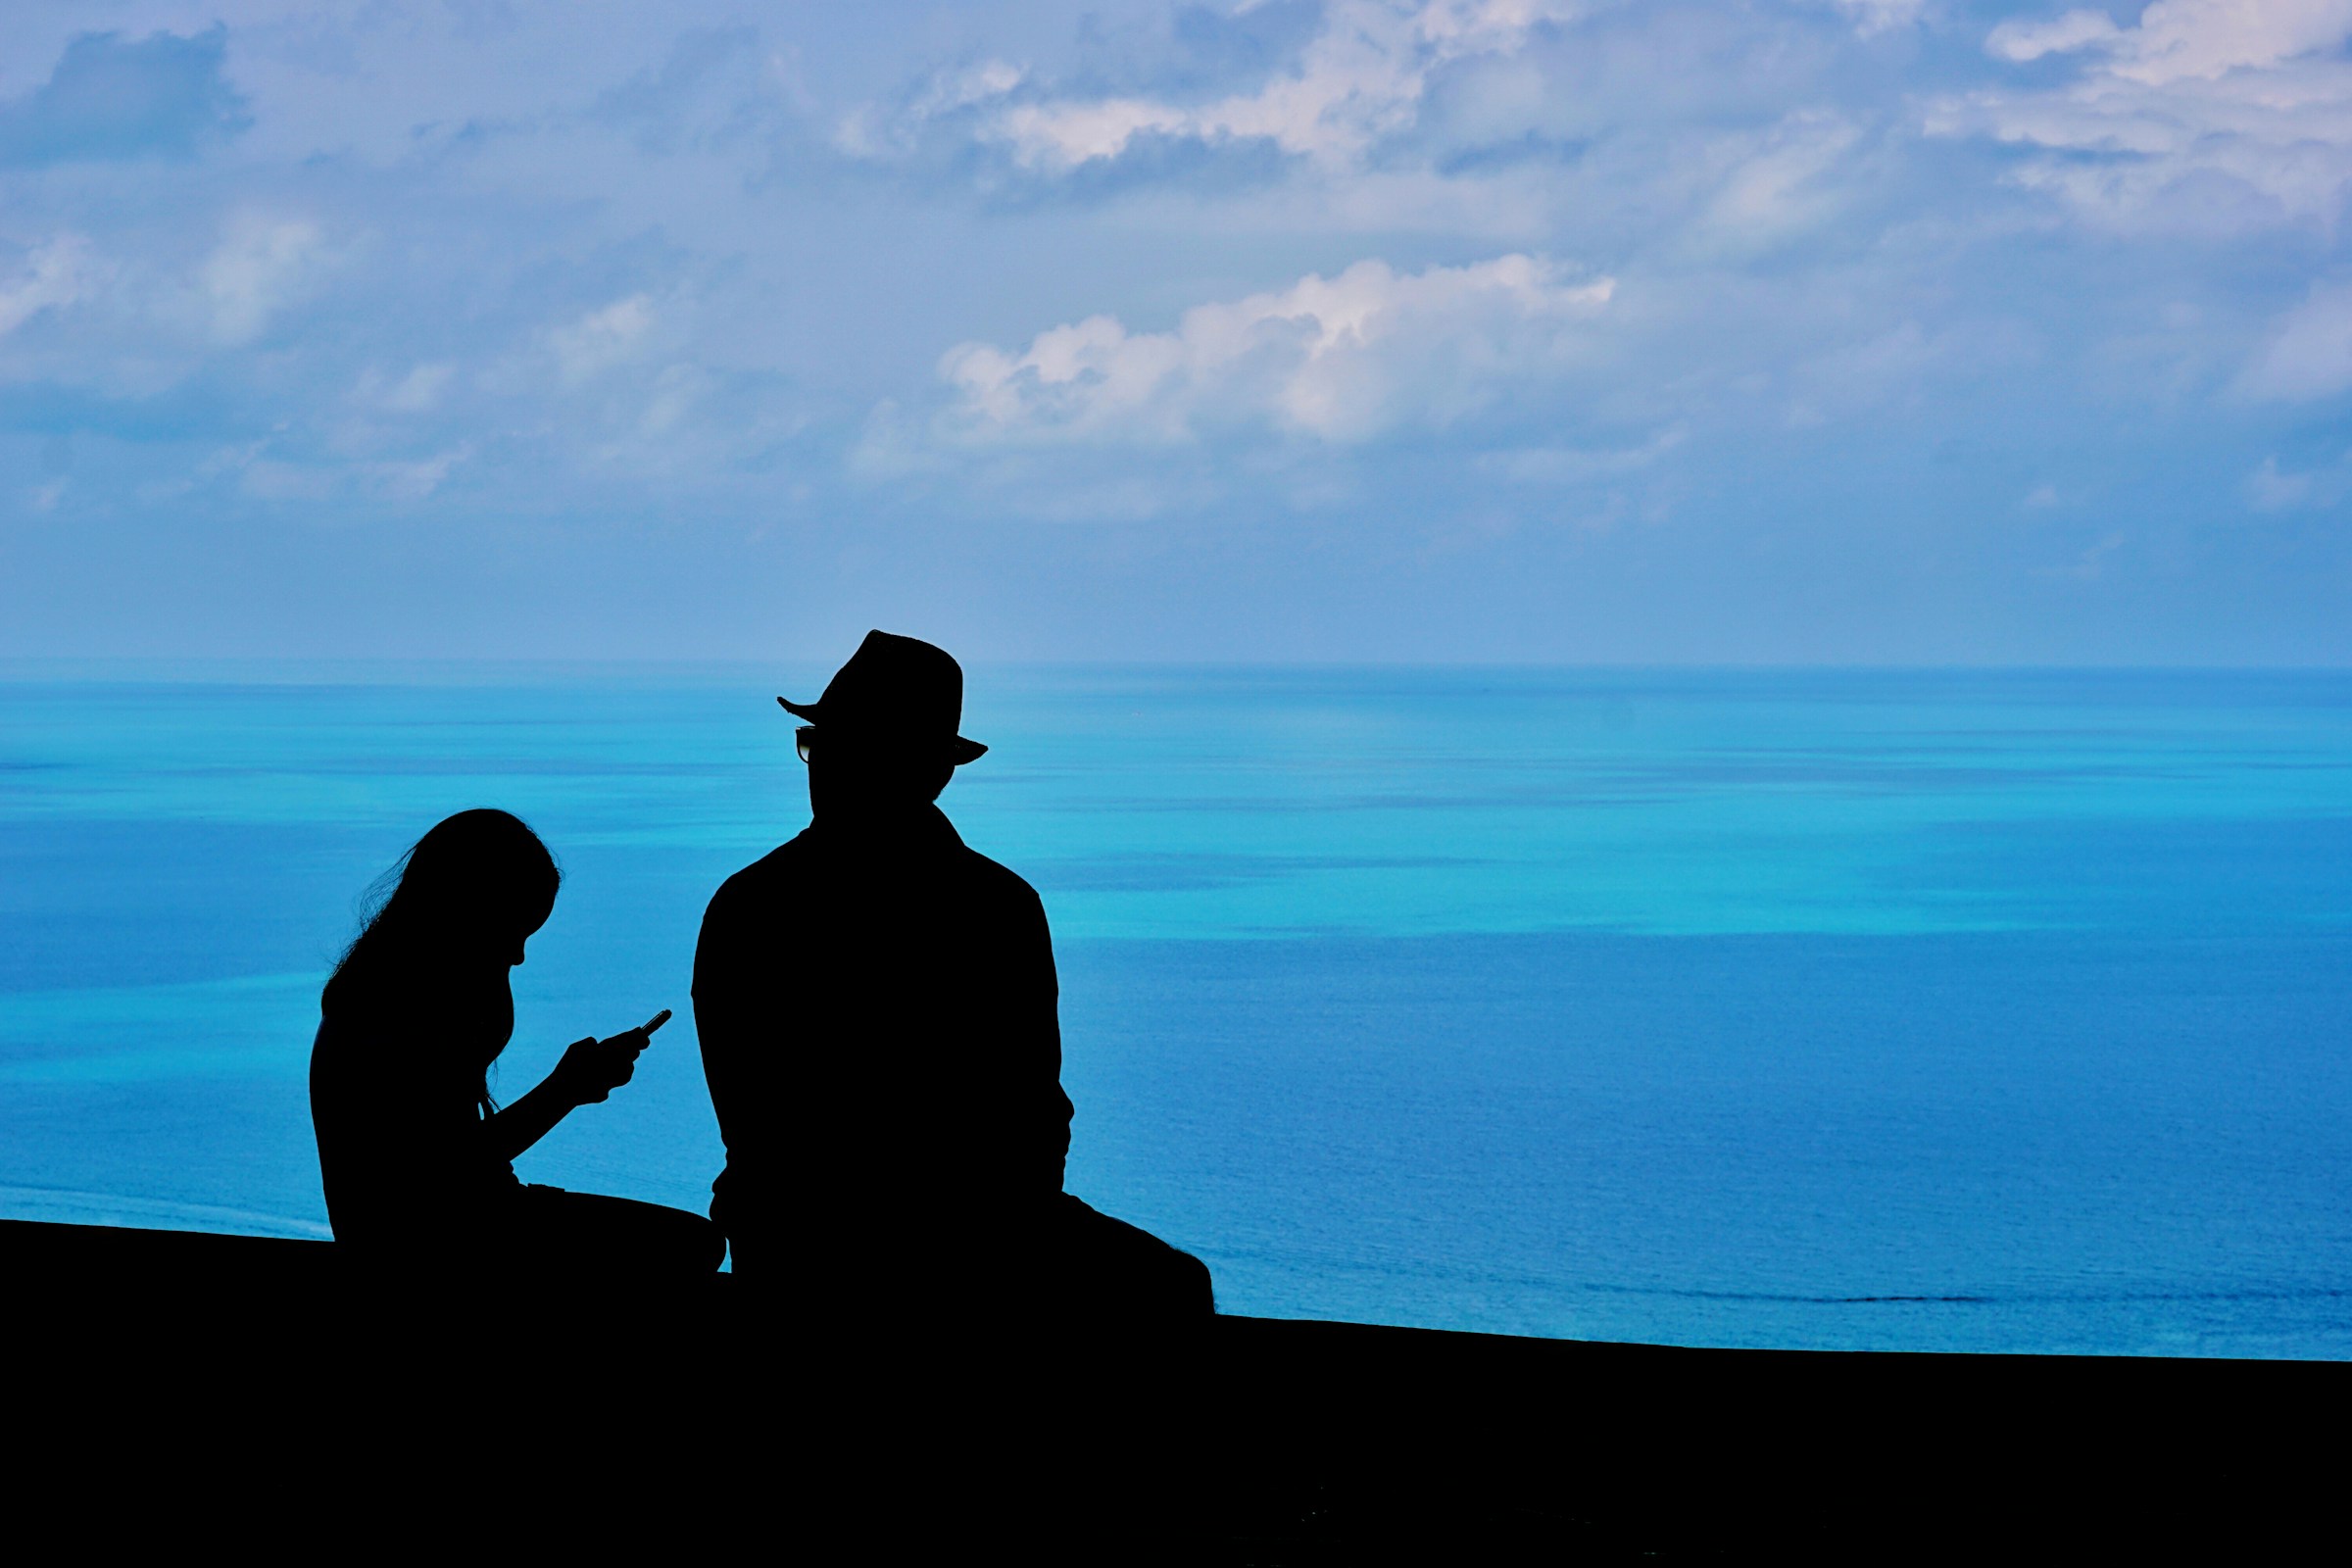 Silhouette of a father and daughter | Source: Unsplash